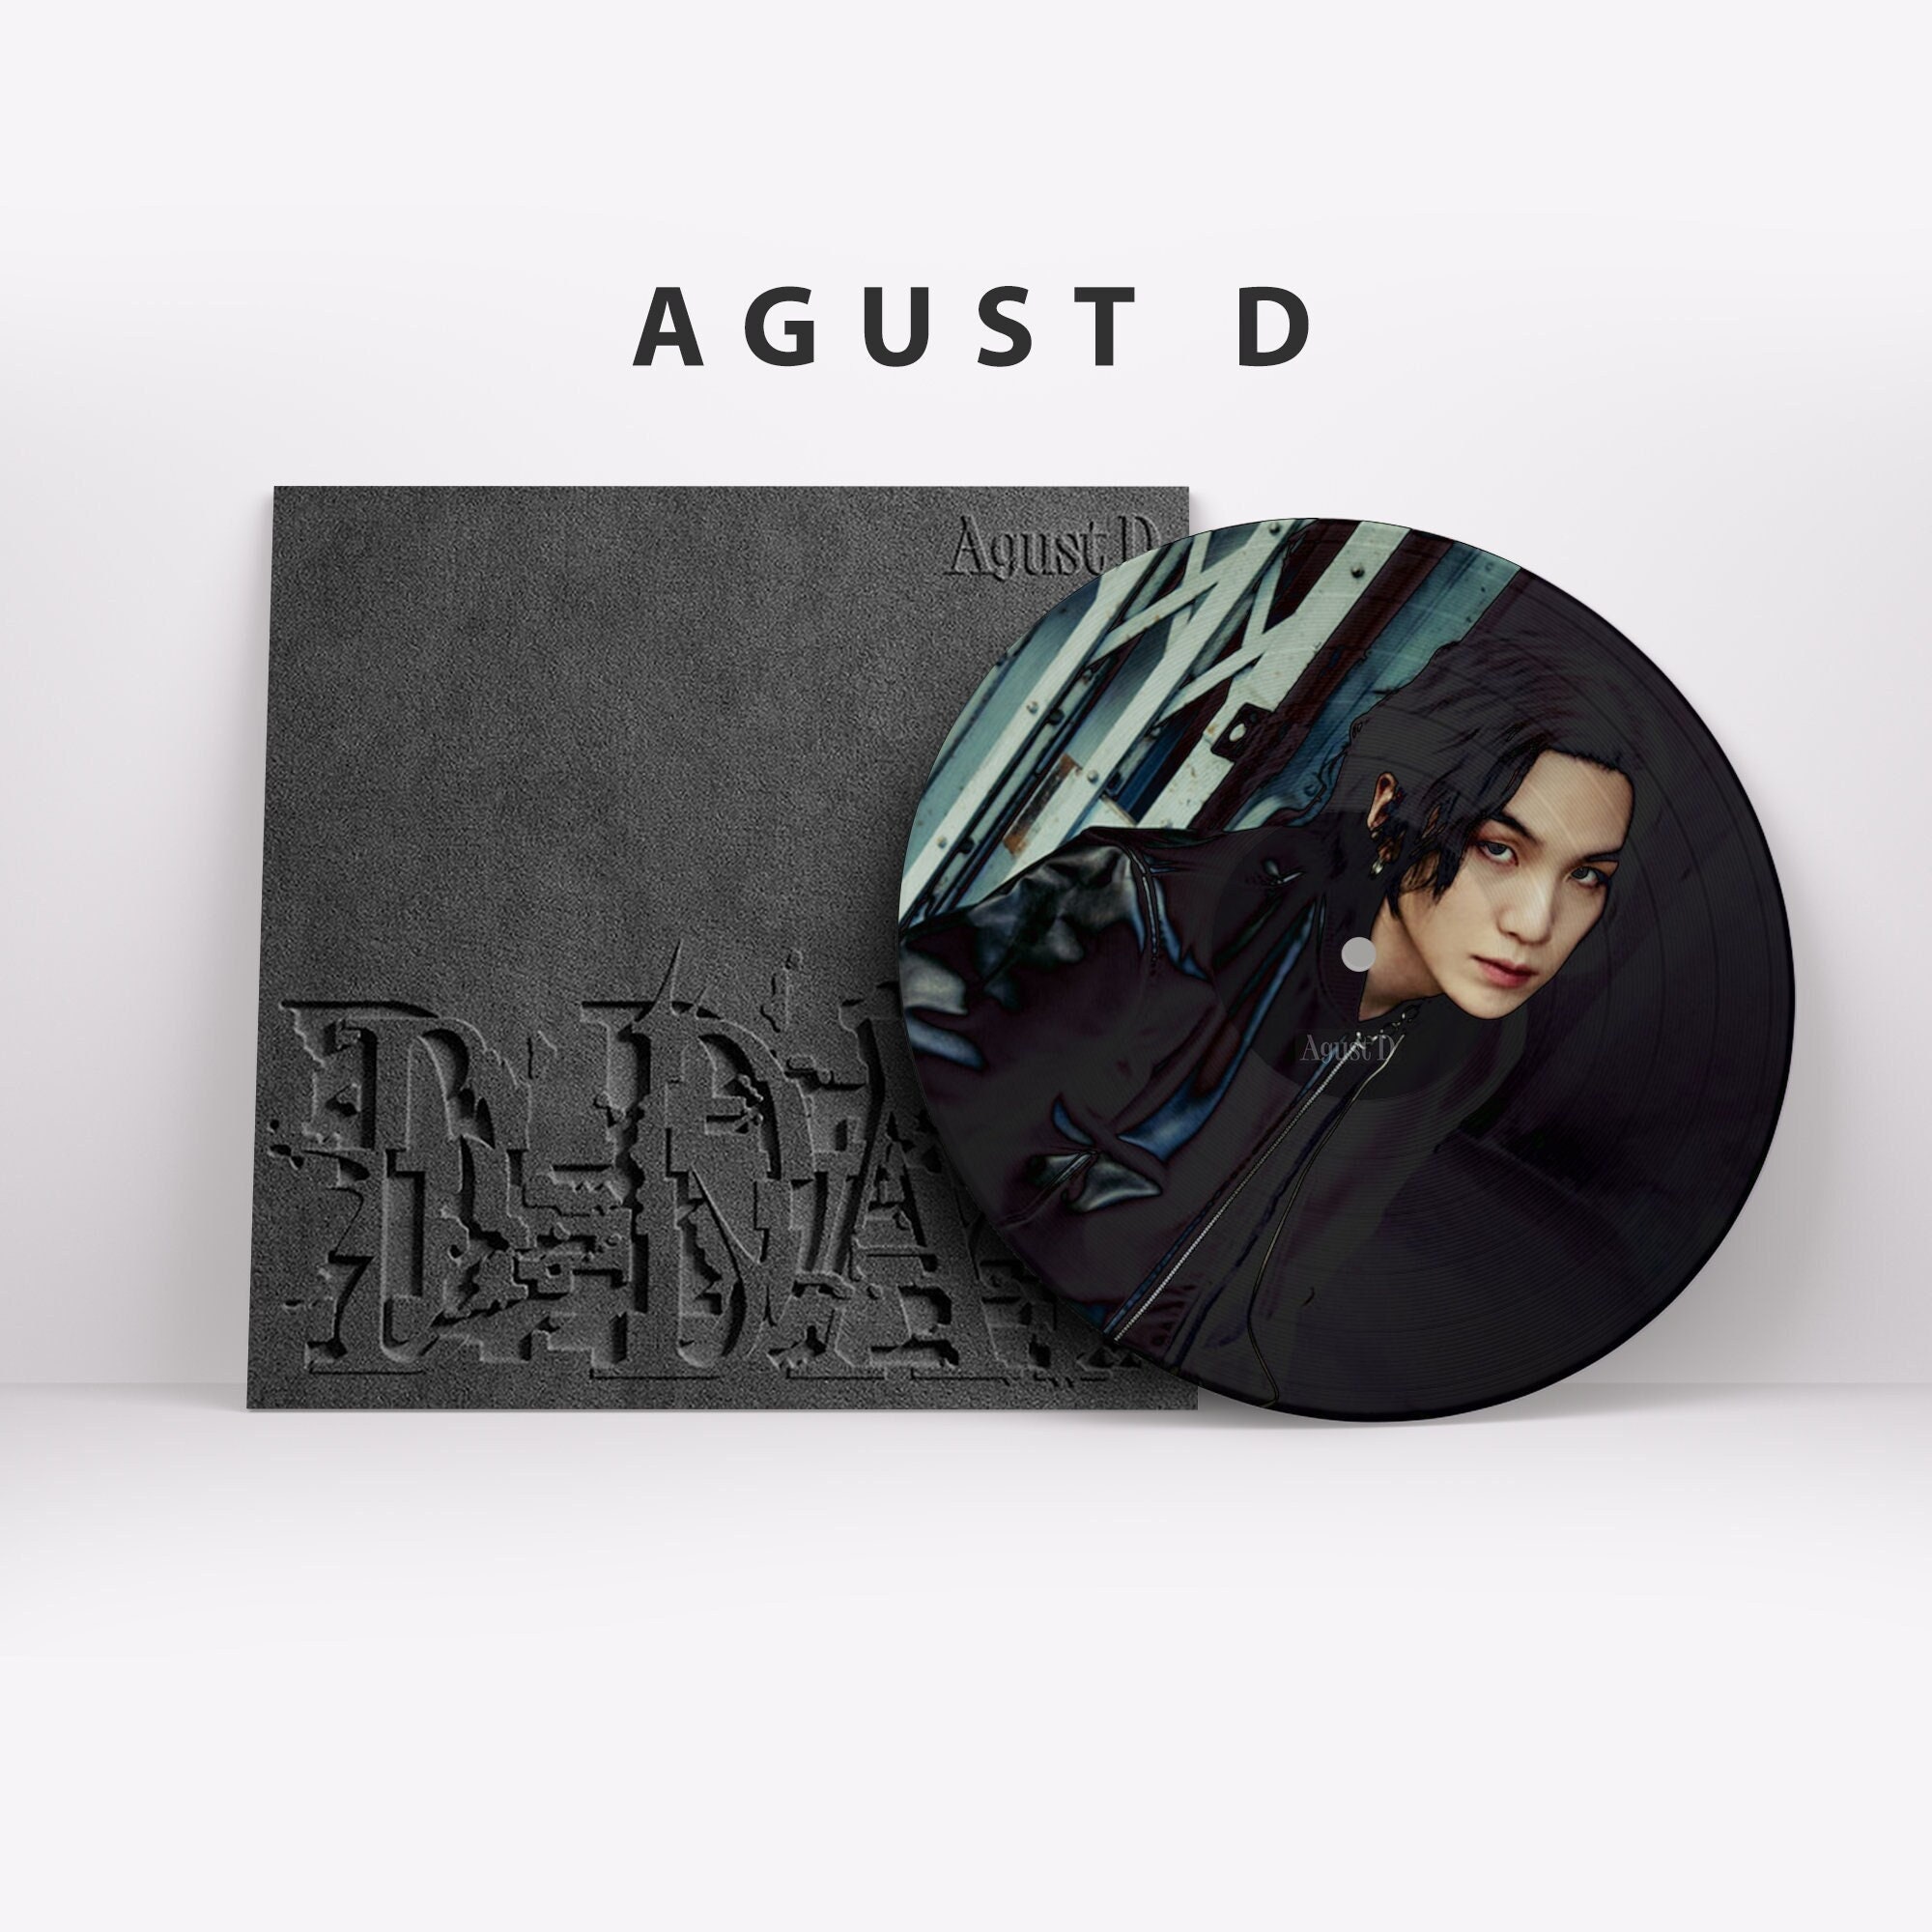 SUGA BTS D-day Album in 12 Vinyl Record Free and Fast Shipping Worldwide  Available in D-day and Full SUGA Picture Designs 